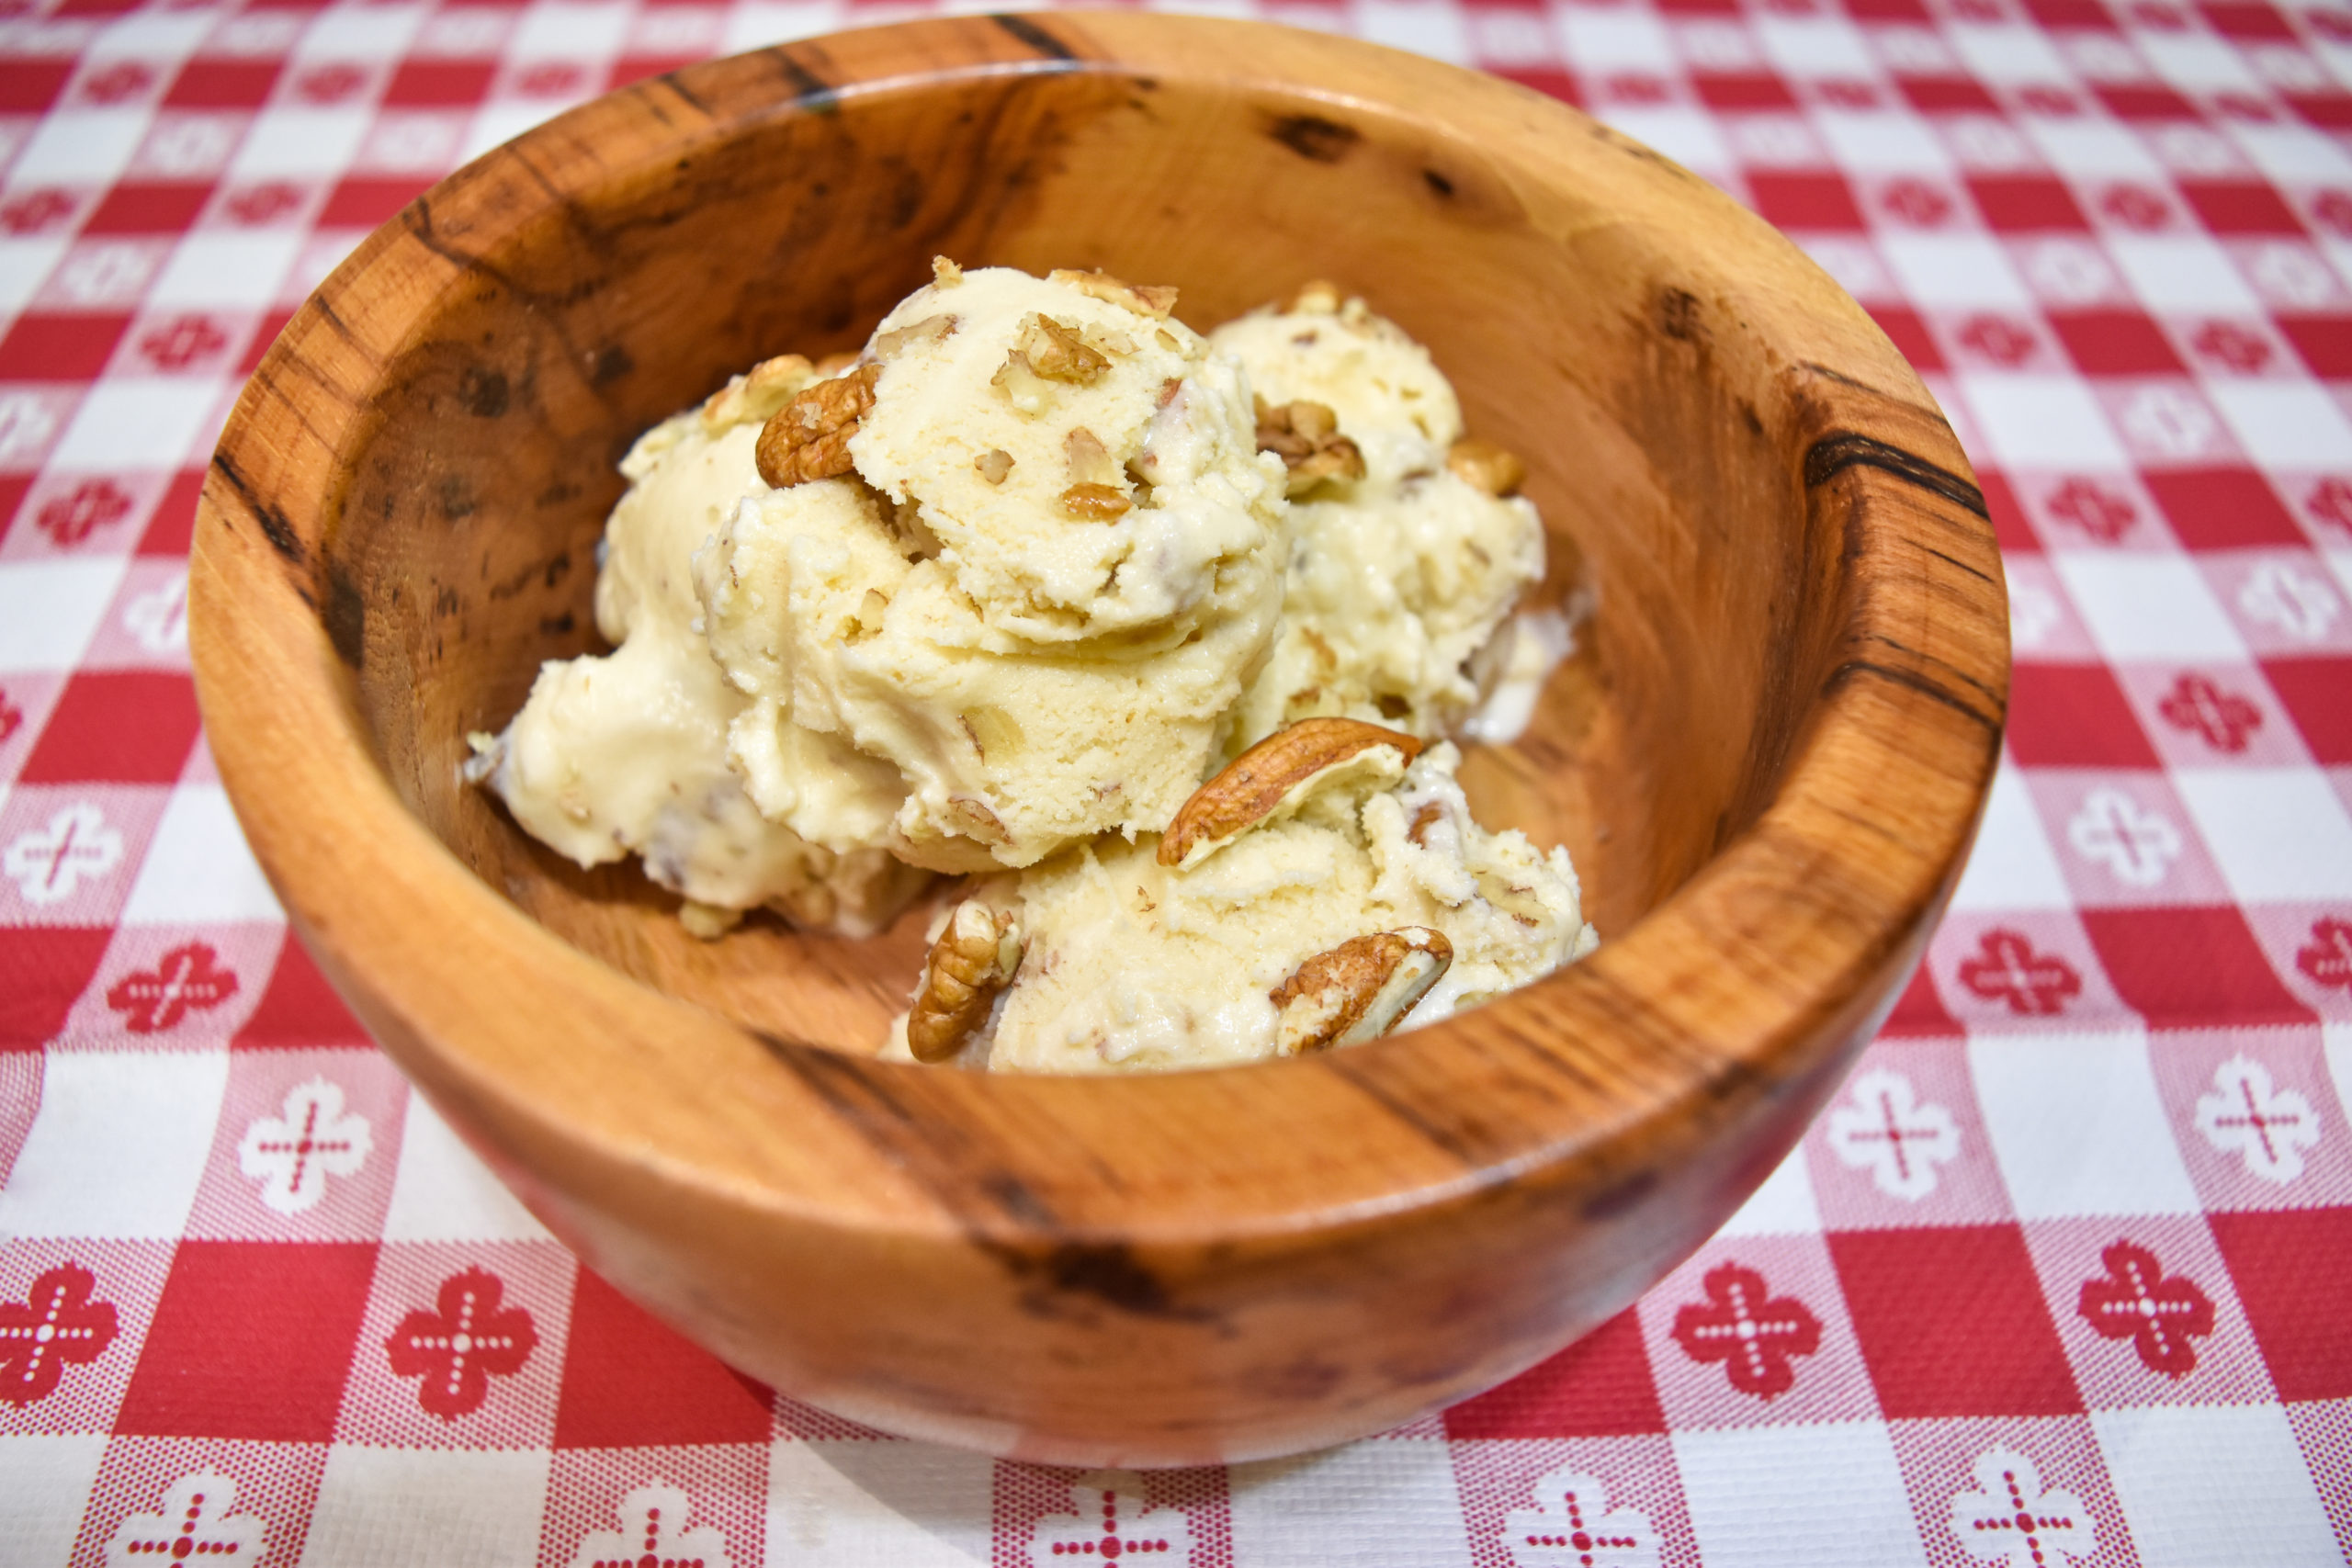 Three scoops of butter pecan ice cream sit in a wooden bowl on a gingham tablecloth.